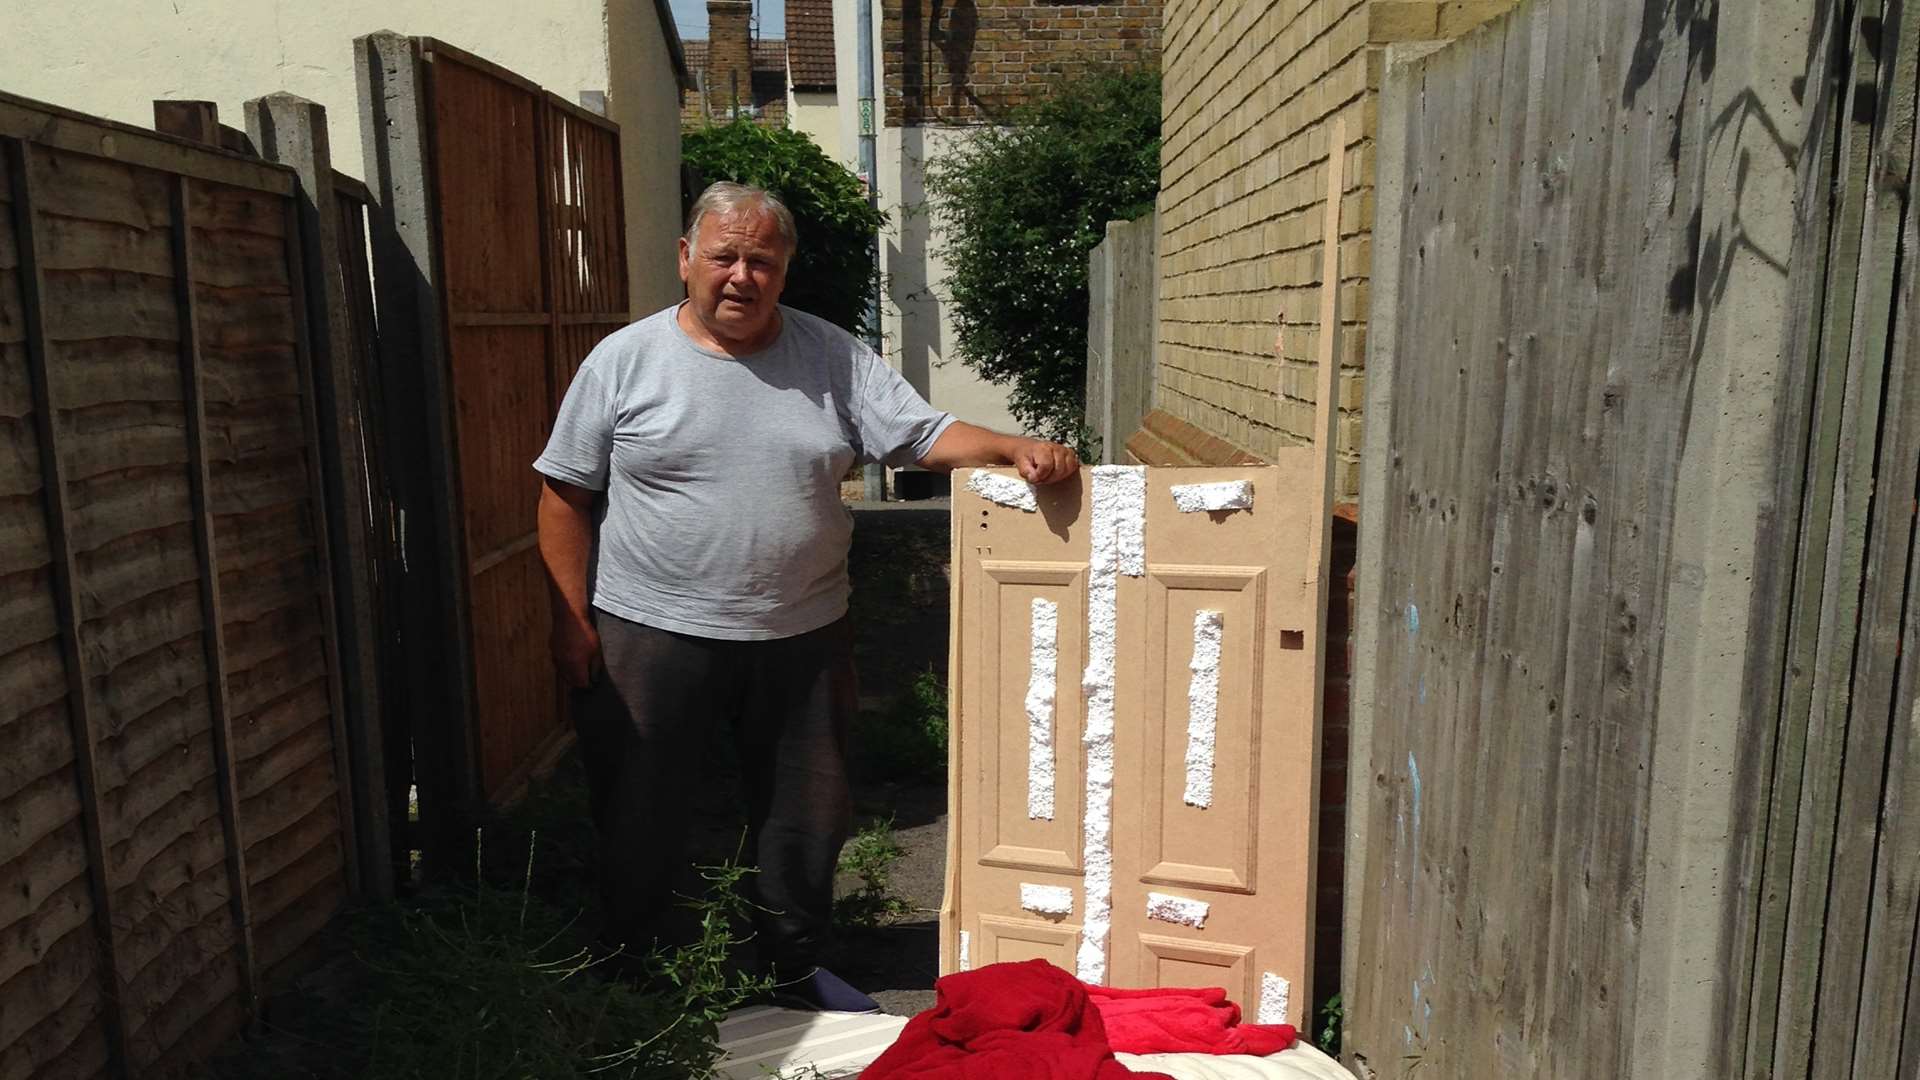 Peter Demoore, of Richmond Street, Sheerness, with illegal waste dumped waste in the alleyway behind his home.